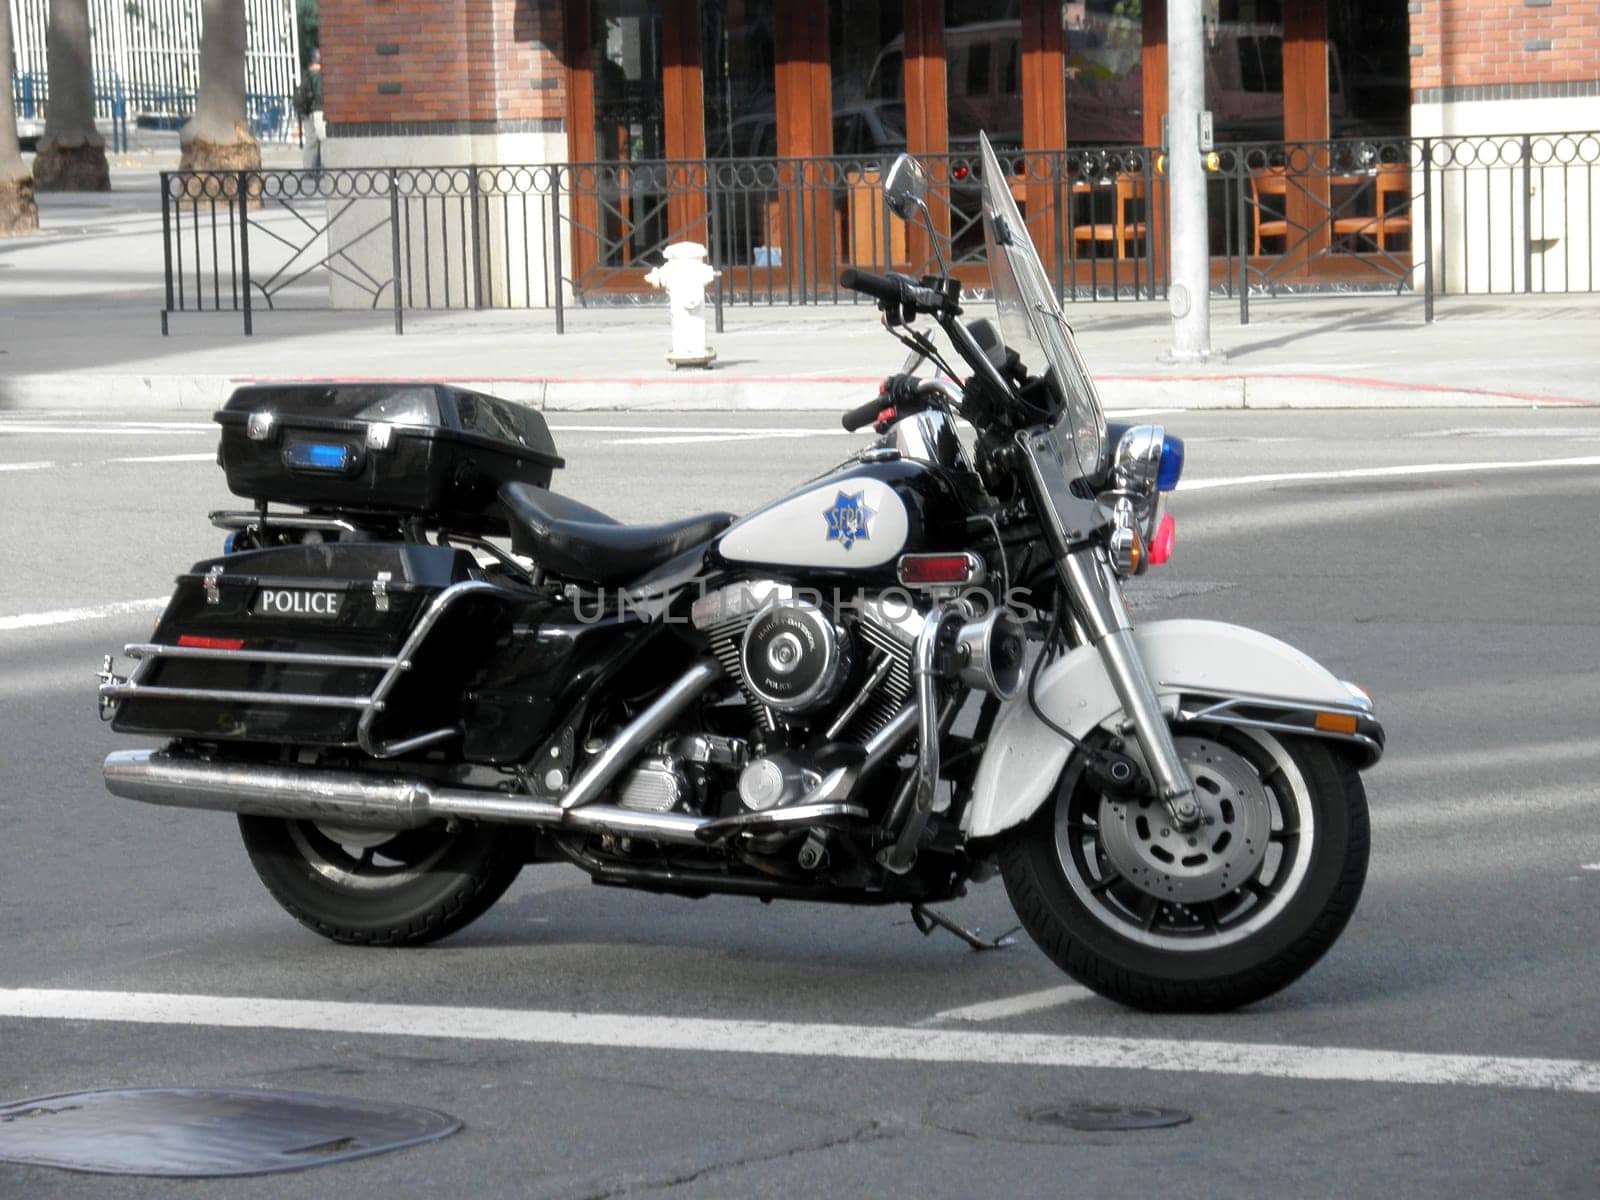 SFPD Motorcycle Parked on Street by EricGBVD